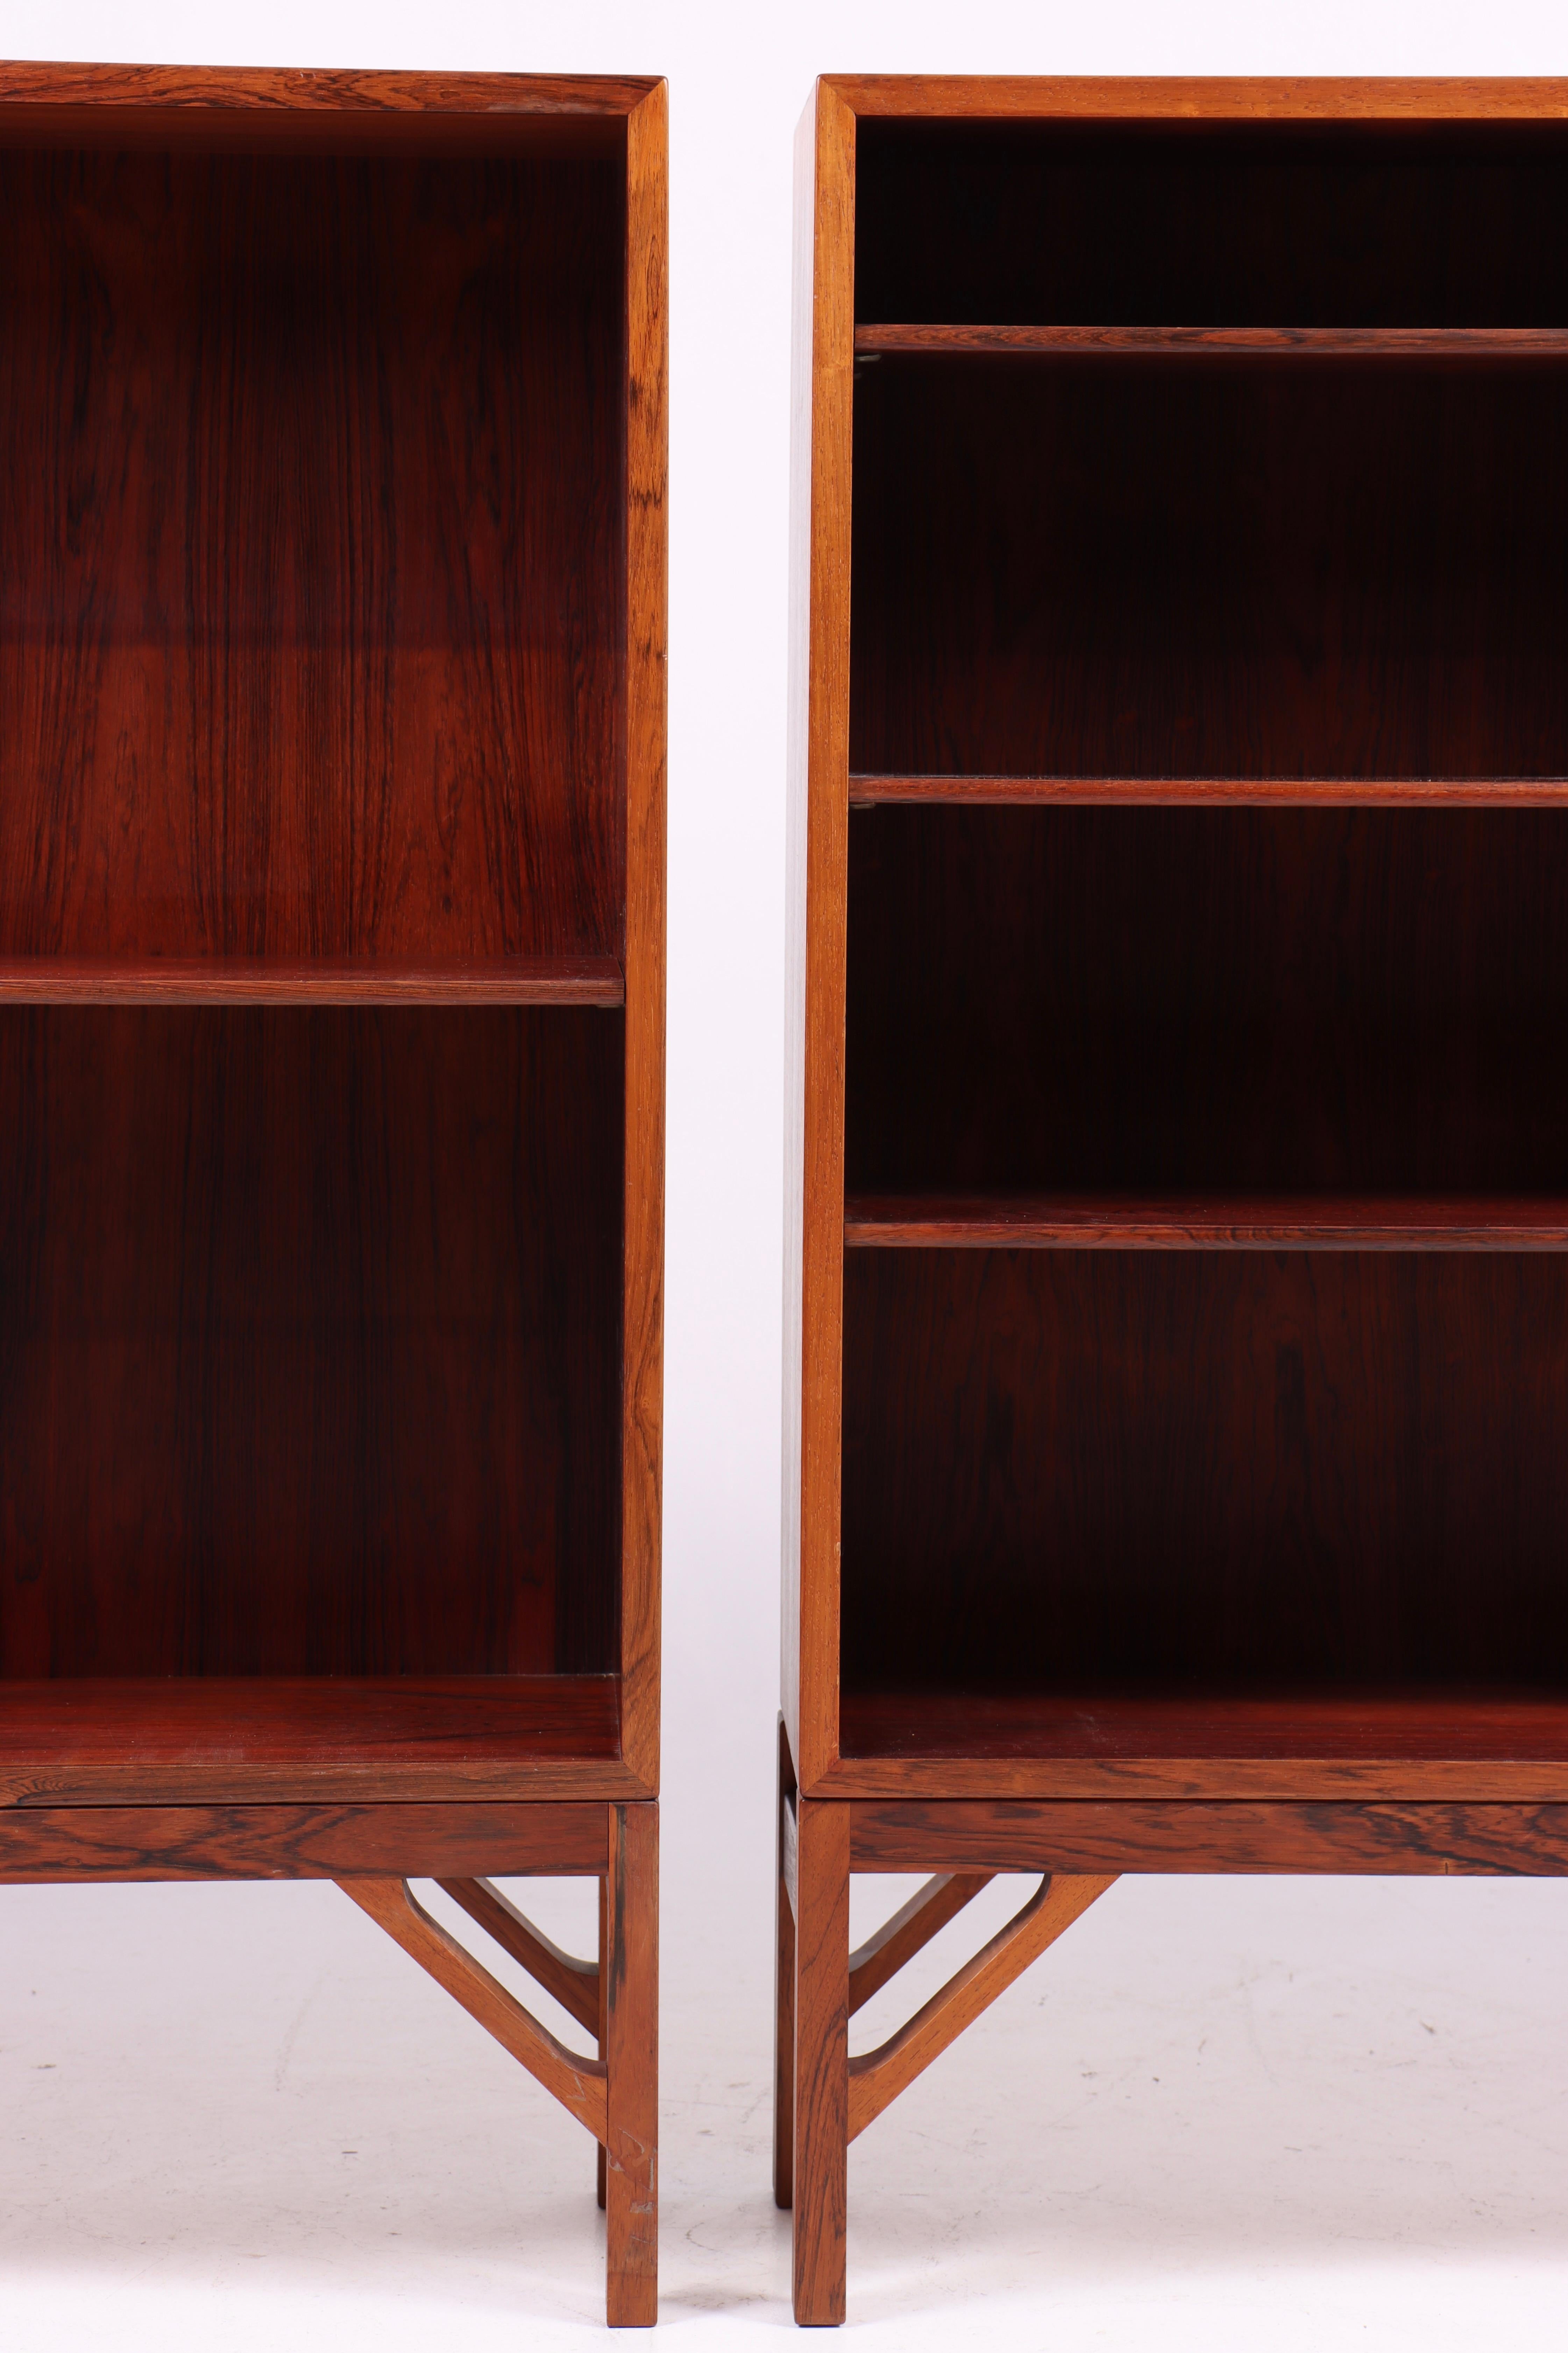 Pair rare of bookcases in rosewood with adjustable shelves, designed by Maa. Børge Mogensen for C.M. Madsen cabinetmakers in 1958. Made in Denmark in the 1960s.